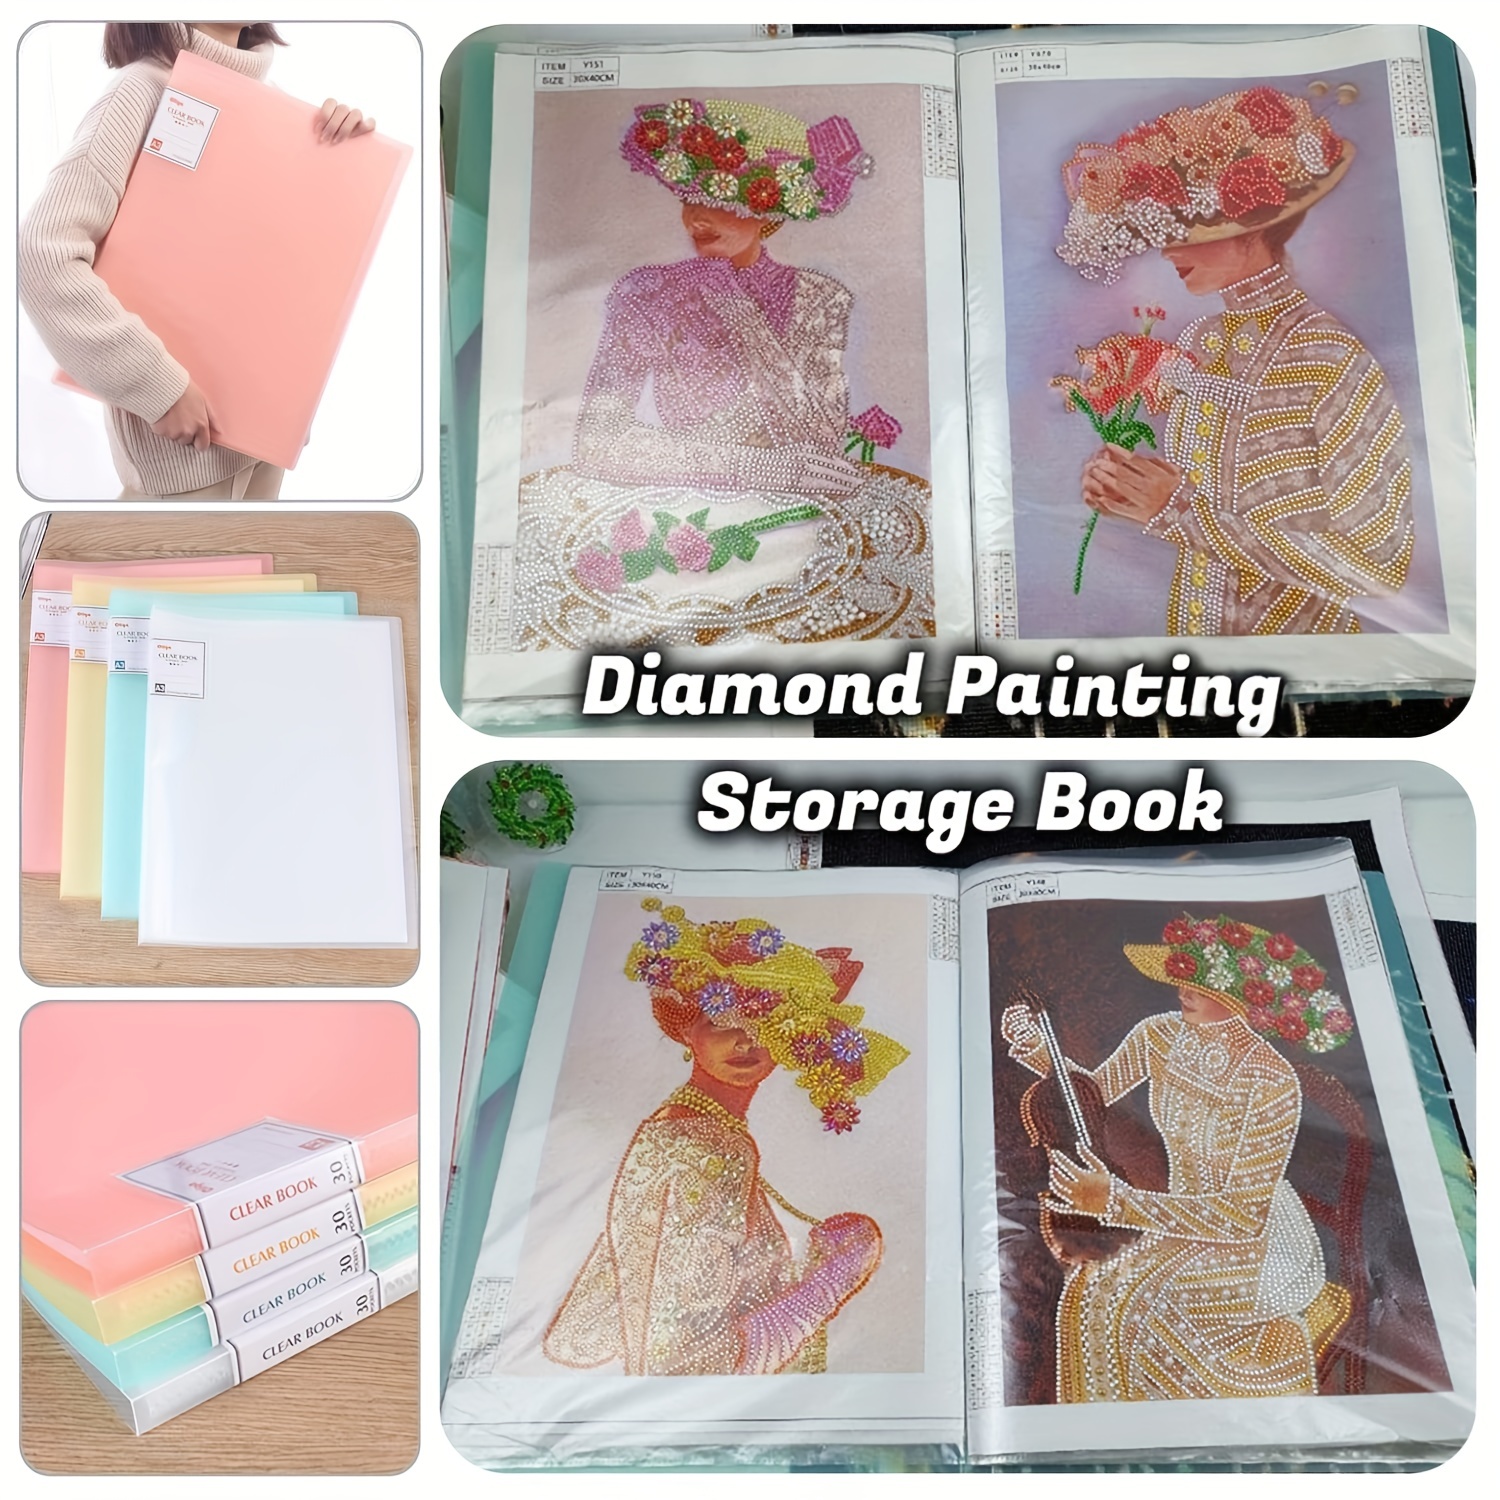 A3 A4 30 Pages Diamond Painting Storage Book Diamond Art Painting